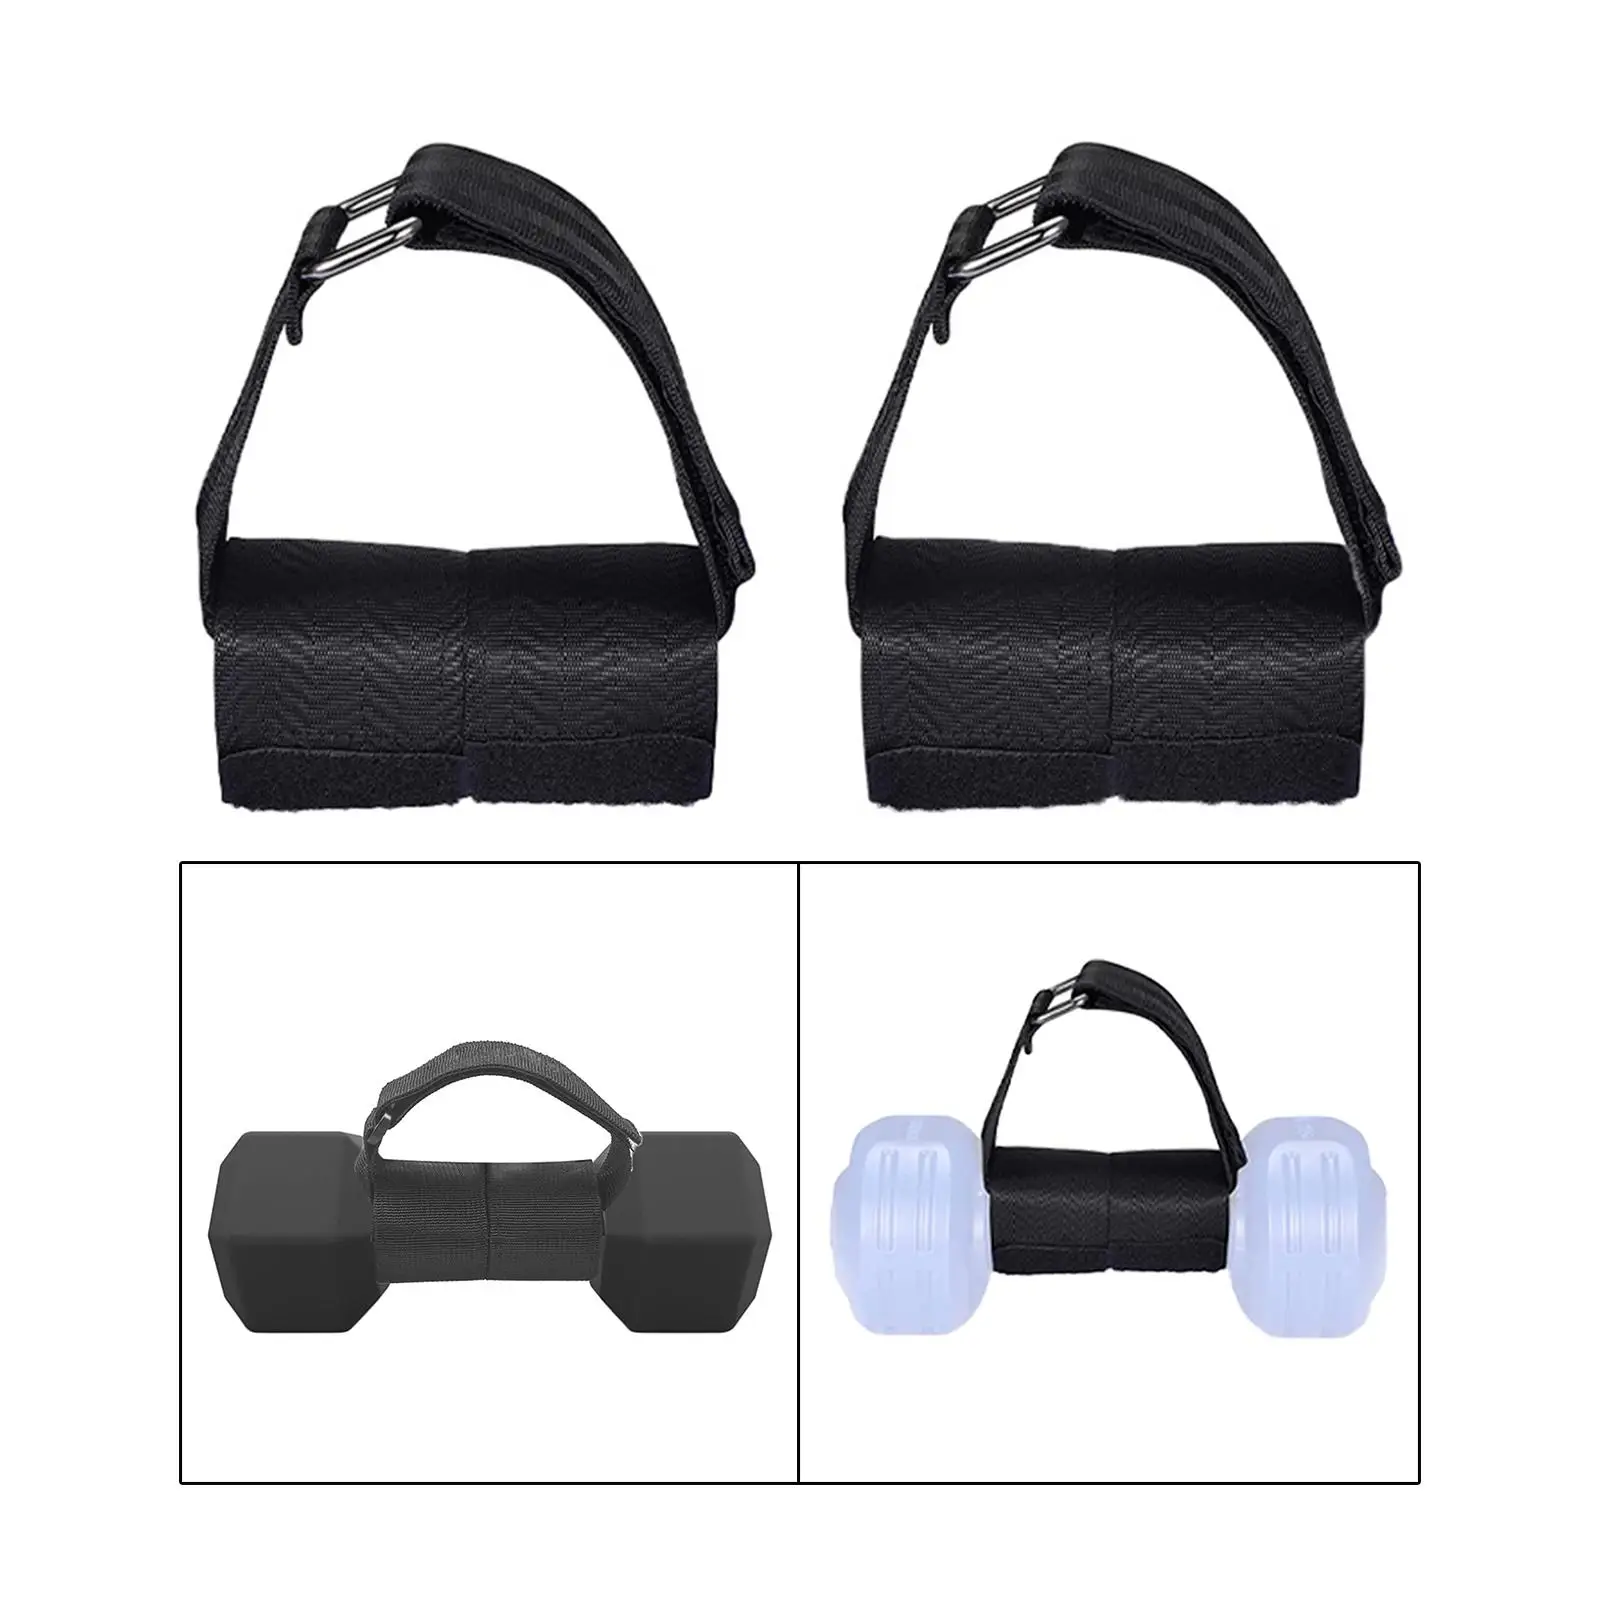 2x Adjustable Weight Dumbbell Ankle Straps Durable Dumbbell Shoes Attachment for Equipment Home Exerciser Gym Strength Training